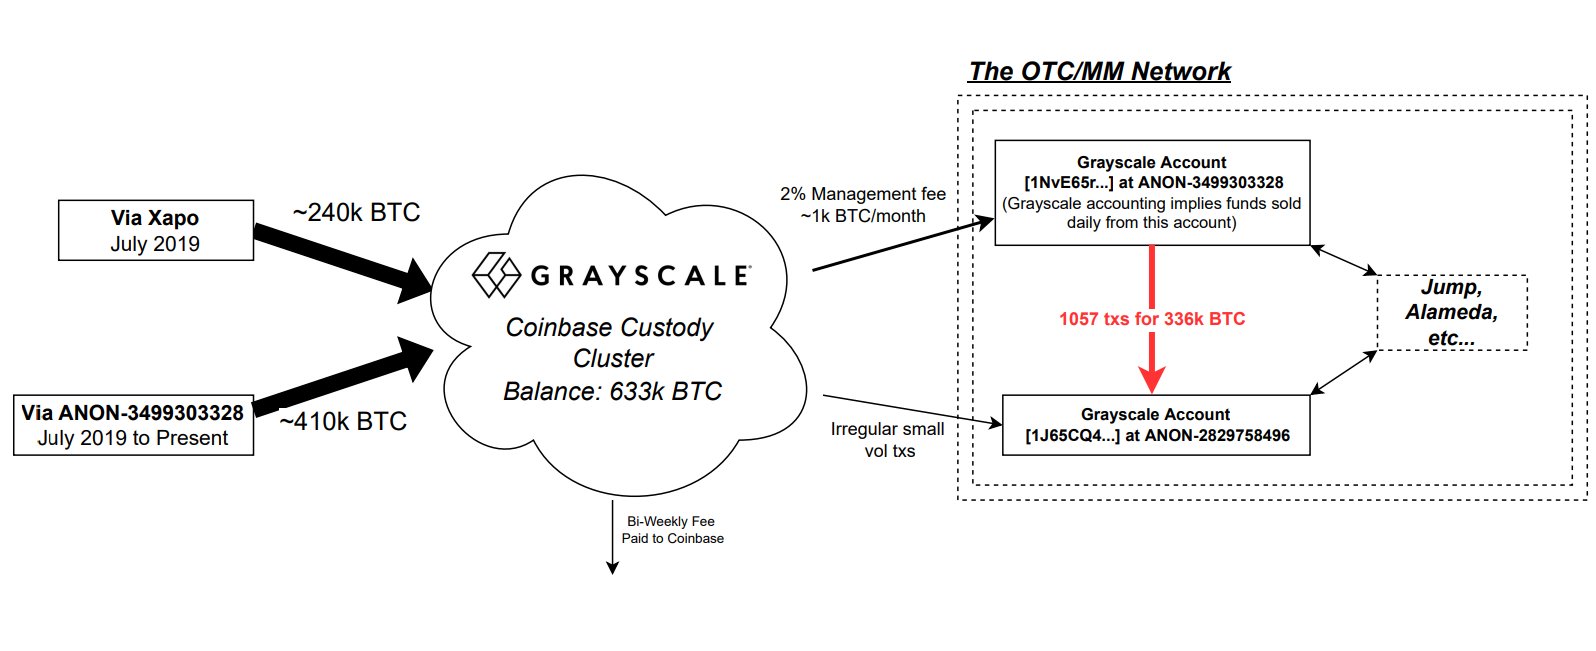 Onchain analysis verifies the number of BTCs held by Grayscale's Bitcoin Trust